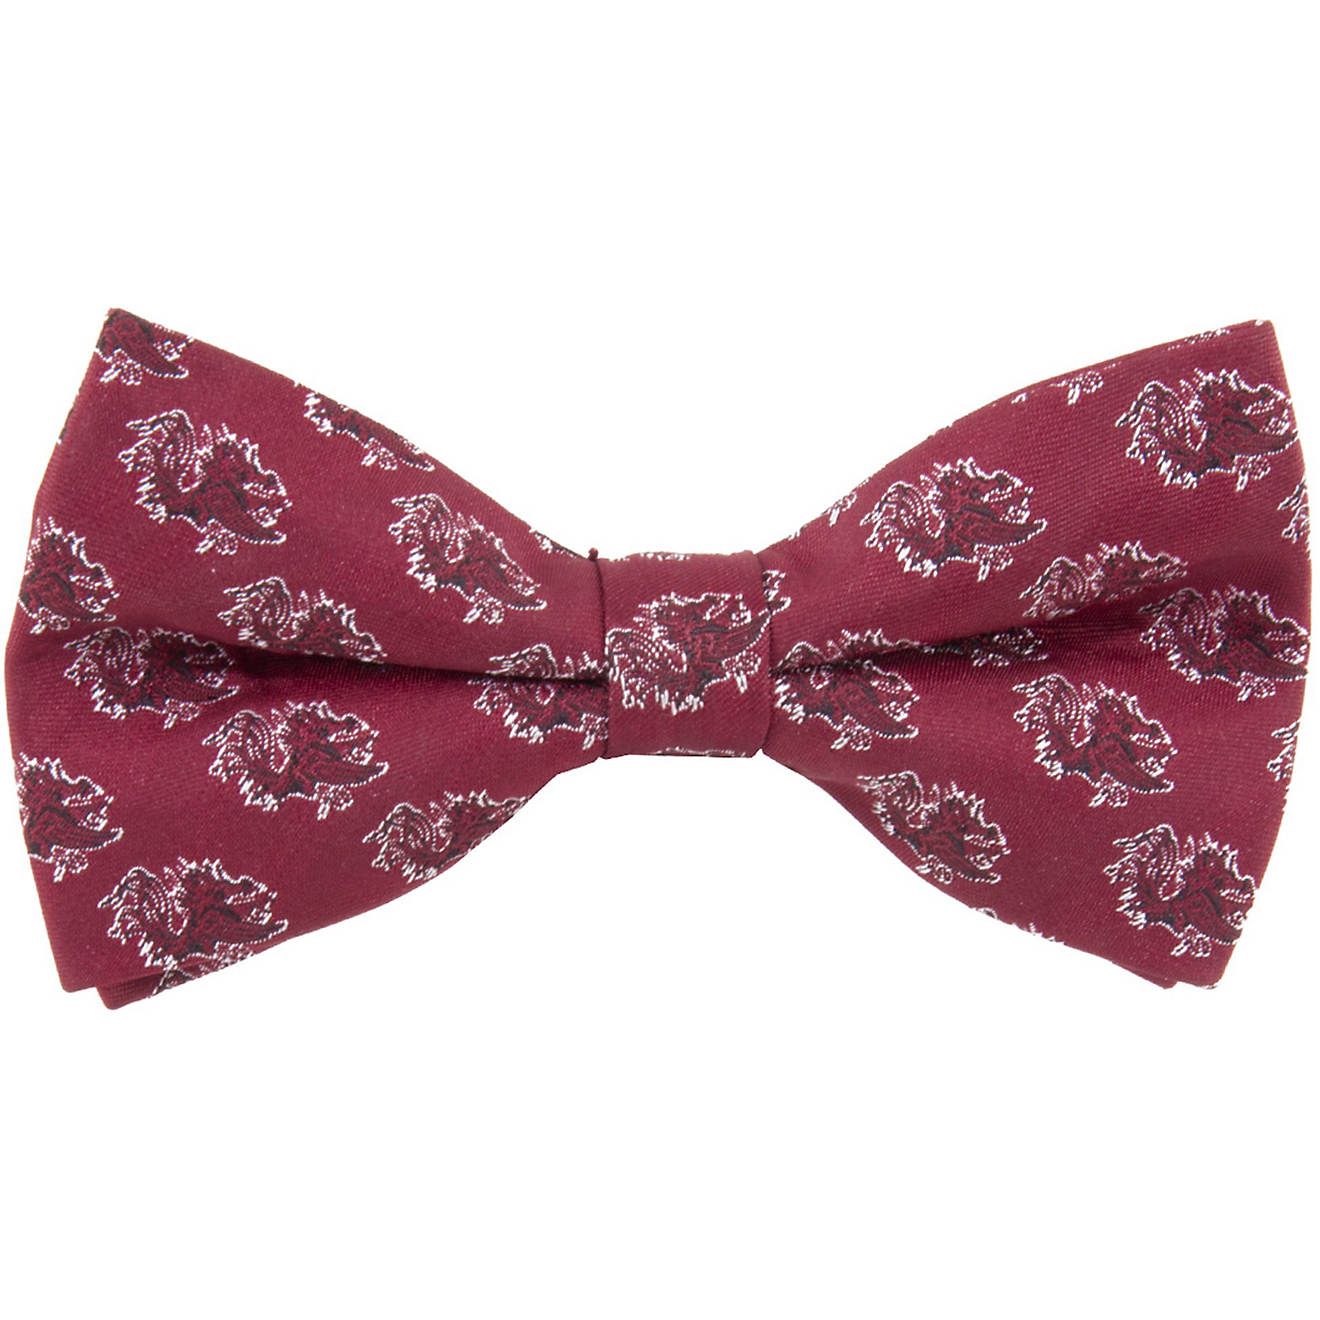 Eagles Wings University of South Carolina Woven Polyester Repeat Bow Tie                                                         - view number 1